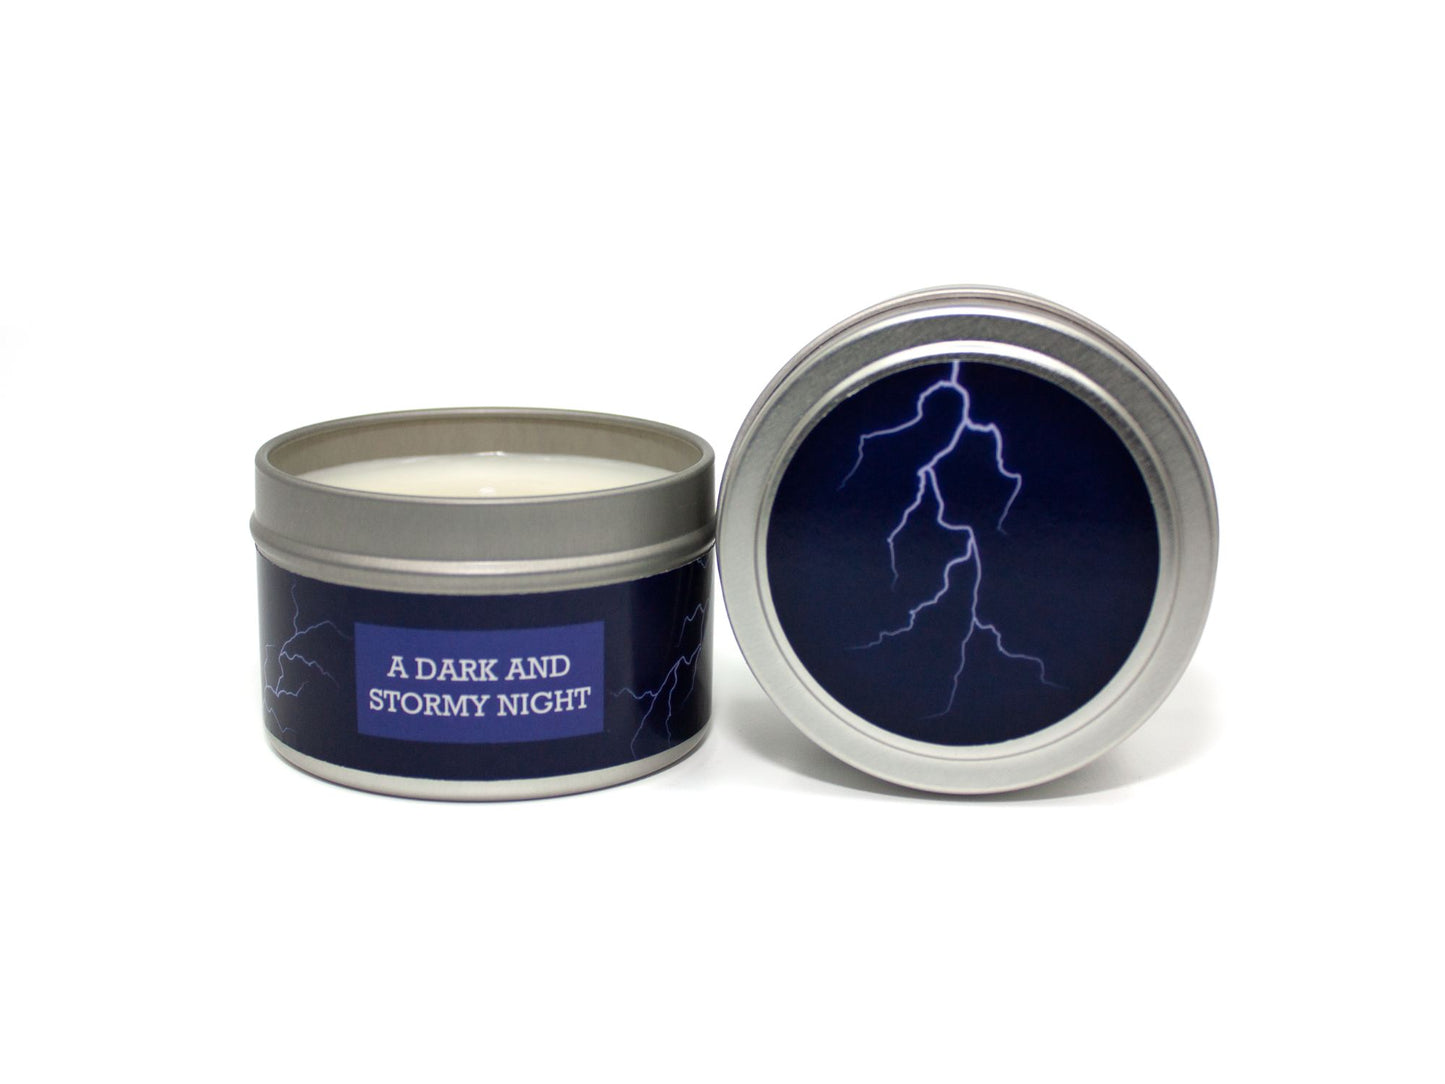 Onset & Rime rain scented candle called "A Dark and Stormy Night" in a 4 oz silver tin. The circular label on top is dark blue with a white lightning bolt. The text on the front label is "A Dark and Stormy Night - Cool Rain, Wet Stone, Oak".